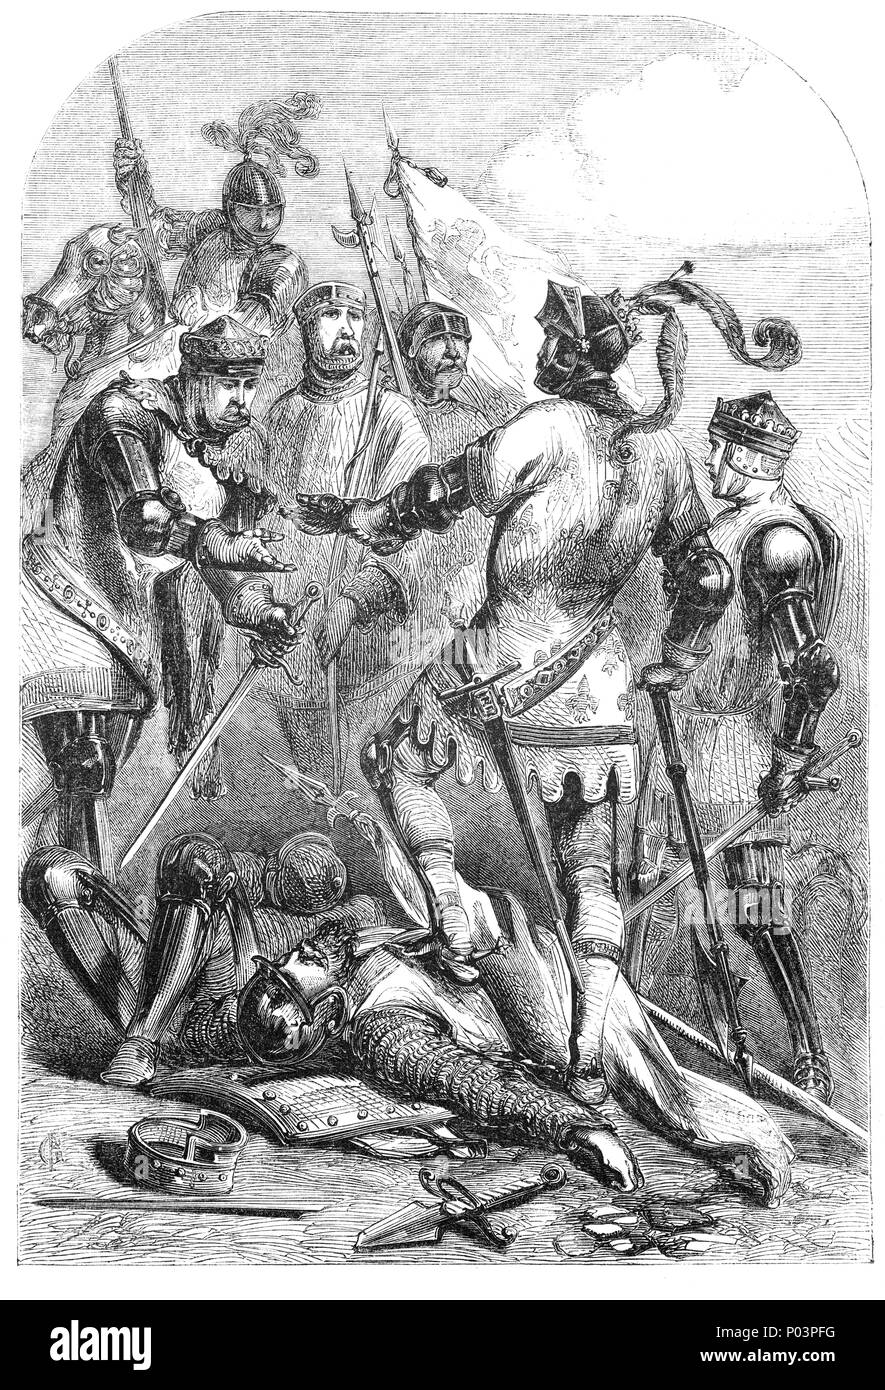 The Battle of Poitiers was fought on 19 September 1356 in Nouaillé, near the city of Poitiers in Aquitaine, western France. An army, many of them veterans of Crécy, led by Edward, the Black Prince, defeated a larger French and allied army led by King John II of France, leading to the capture of the king, his son, and much of the French nobility. It was the second major English victory of the Edwardian phase of the Hundred Years' War. Poitiers was fought ten years after the Battle of Crécy (the first major victory), and about half a century before the third, the Battle of Agincourt (1415). Stock Photo